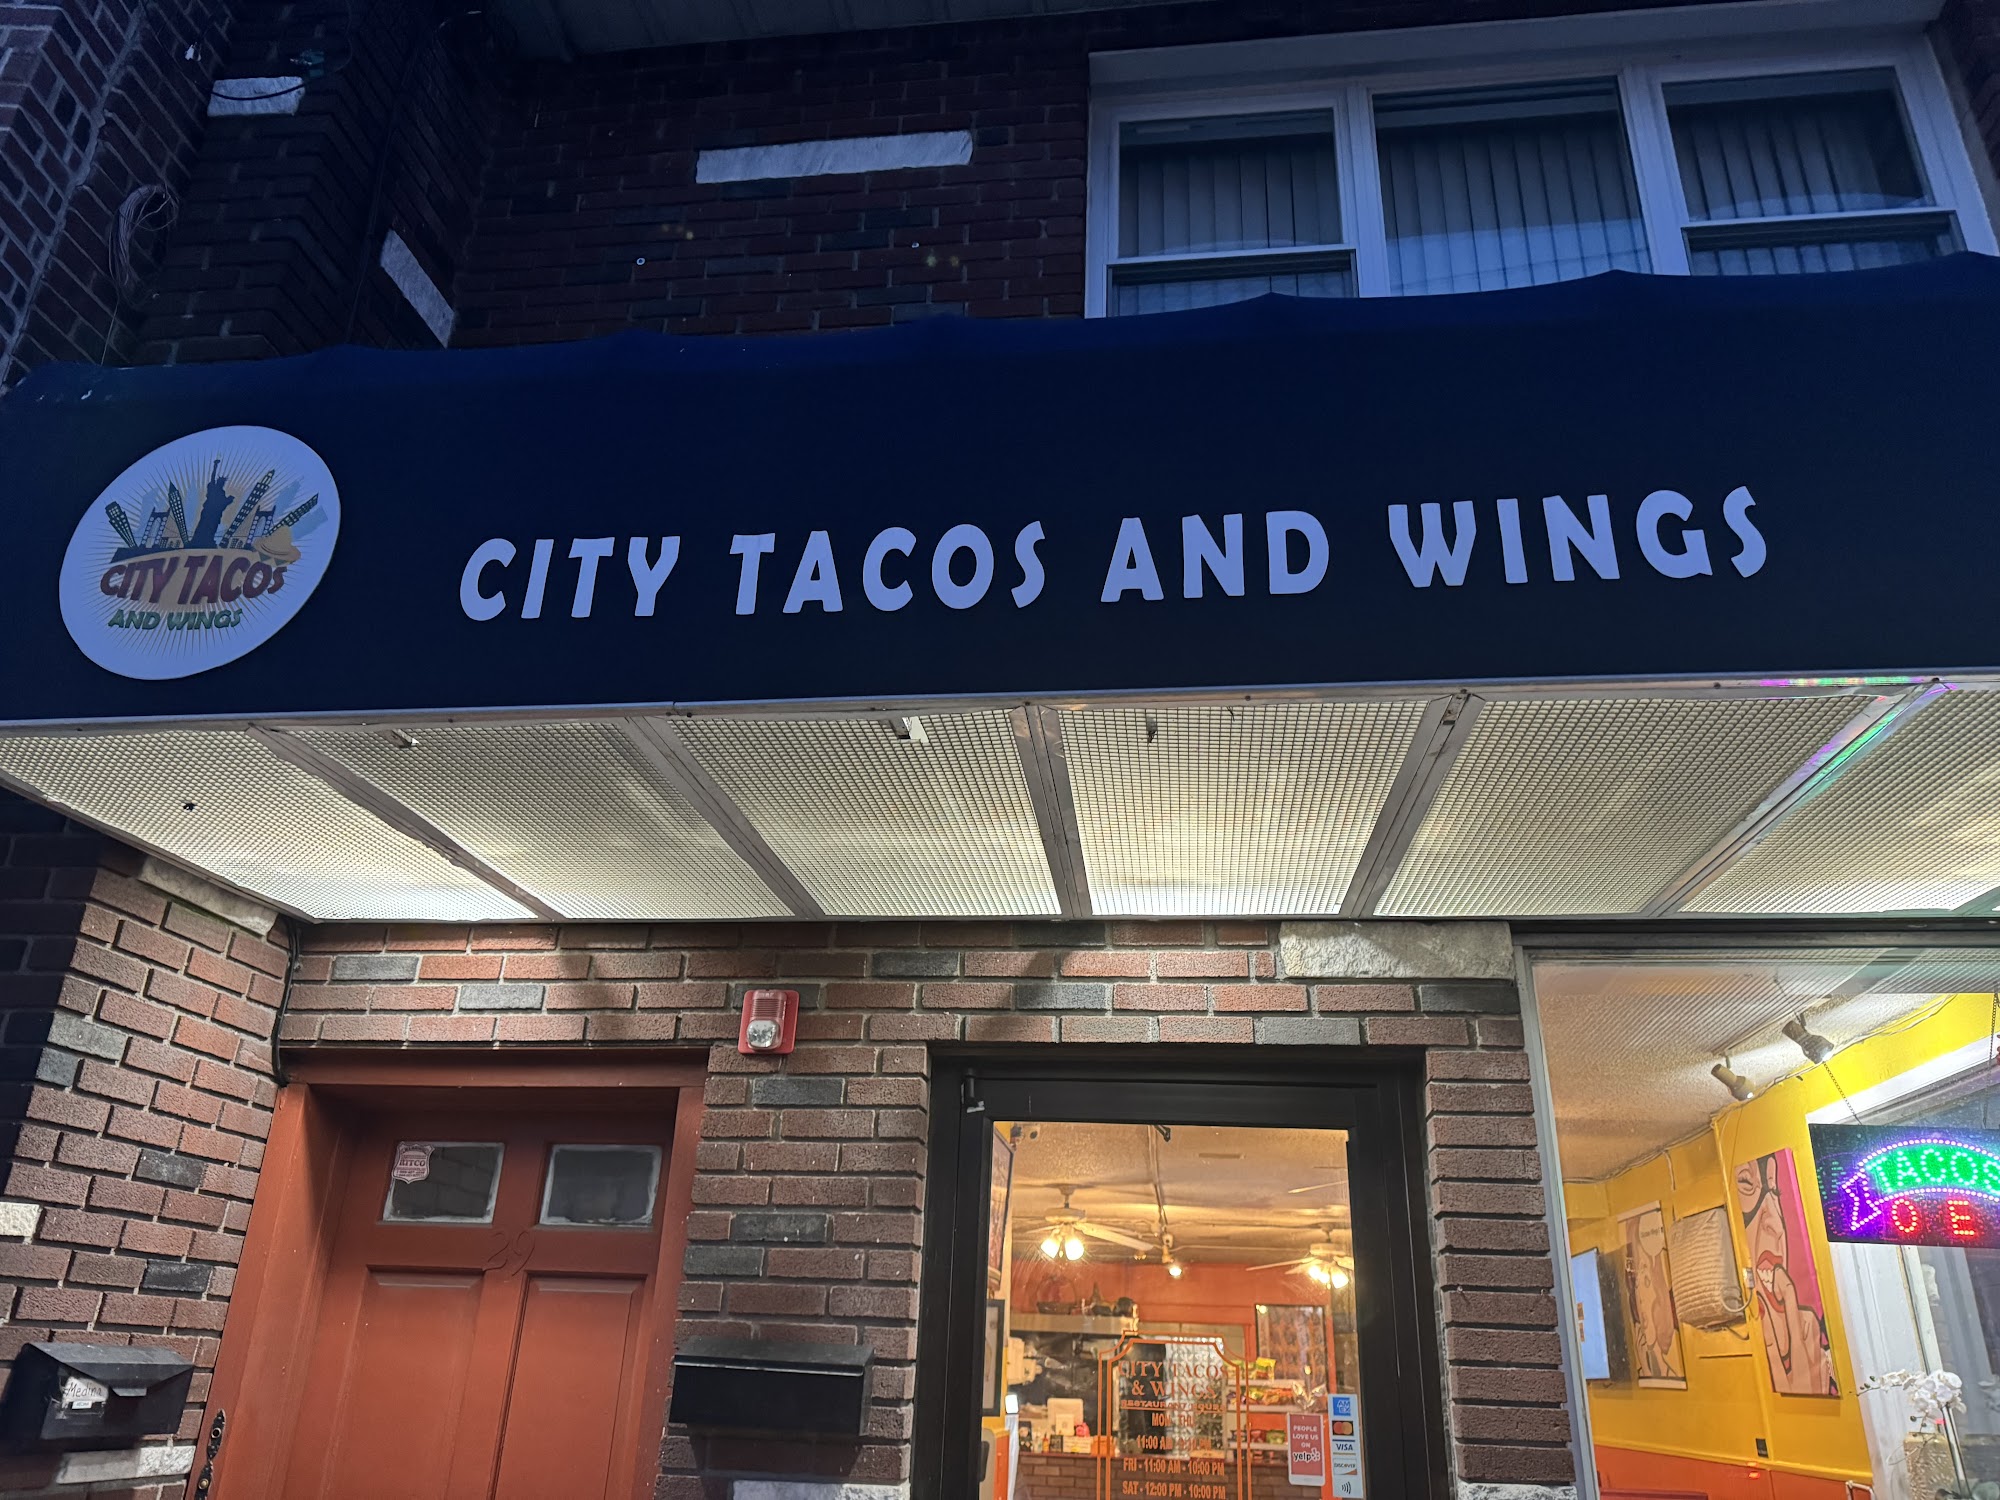 City Tacos and Wings